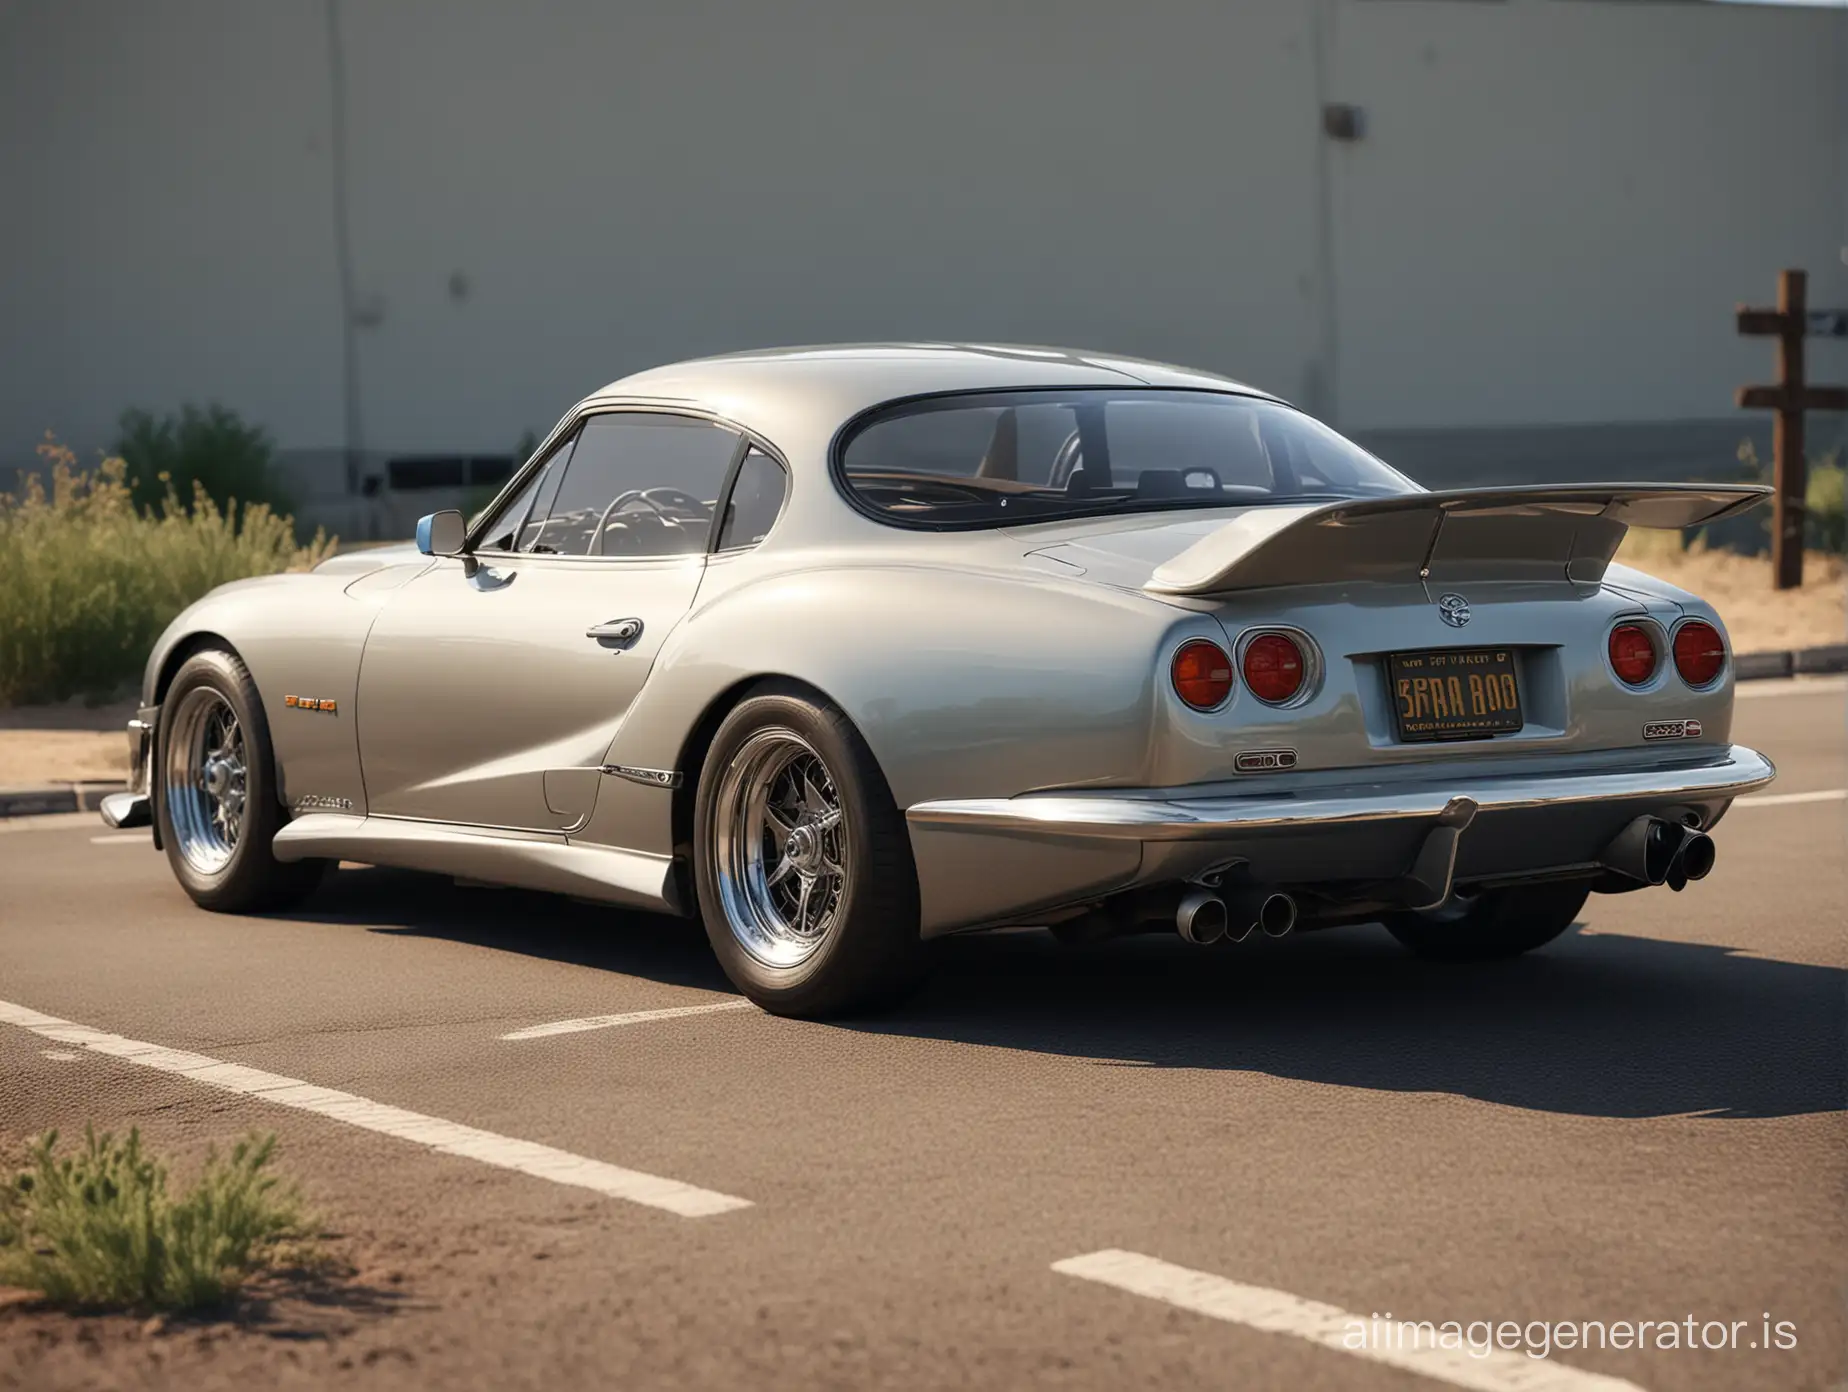 1950-Toyota-Supra-Parked-Under-Noon-Sunlight-Realistic-Summer-Photograph